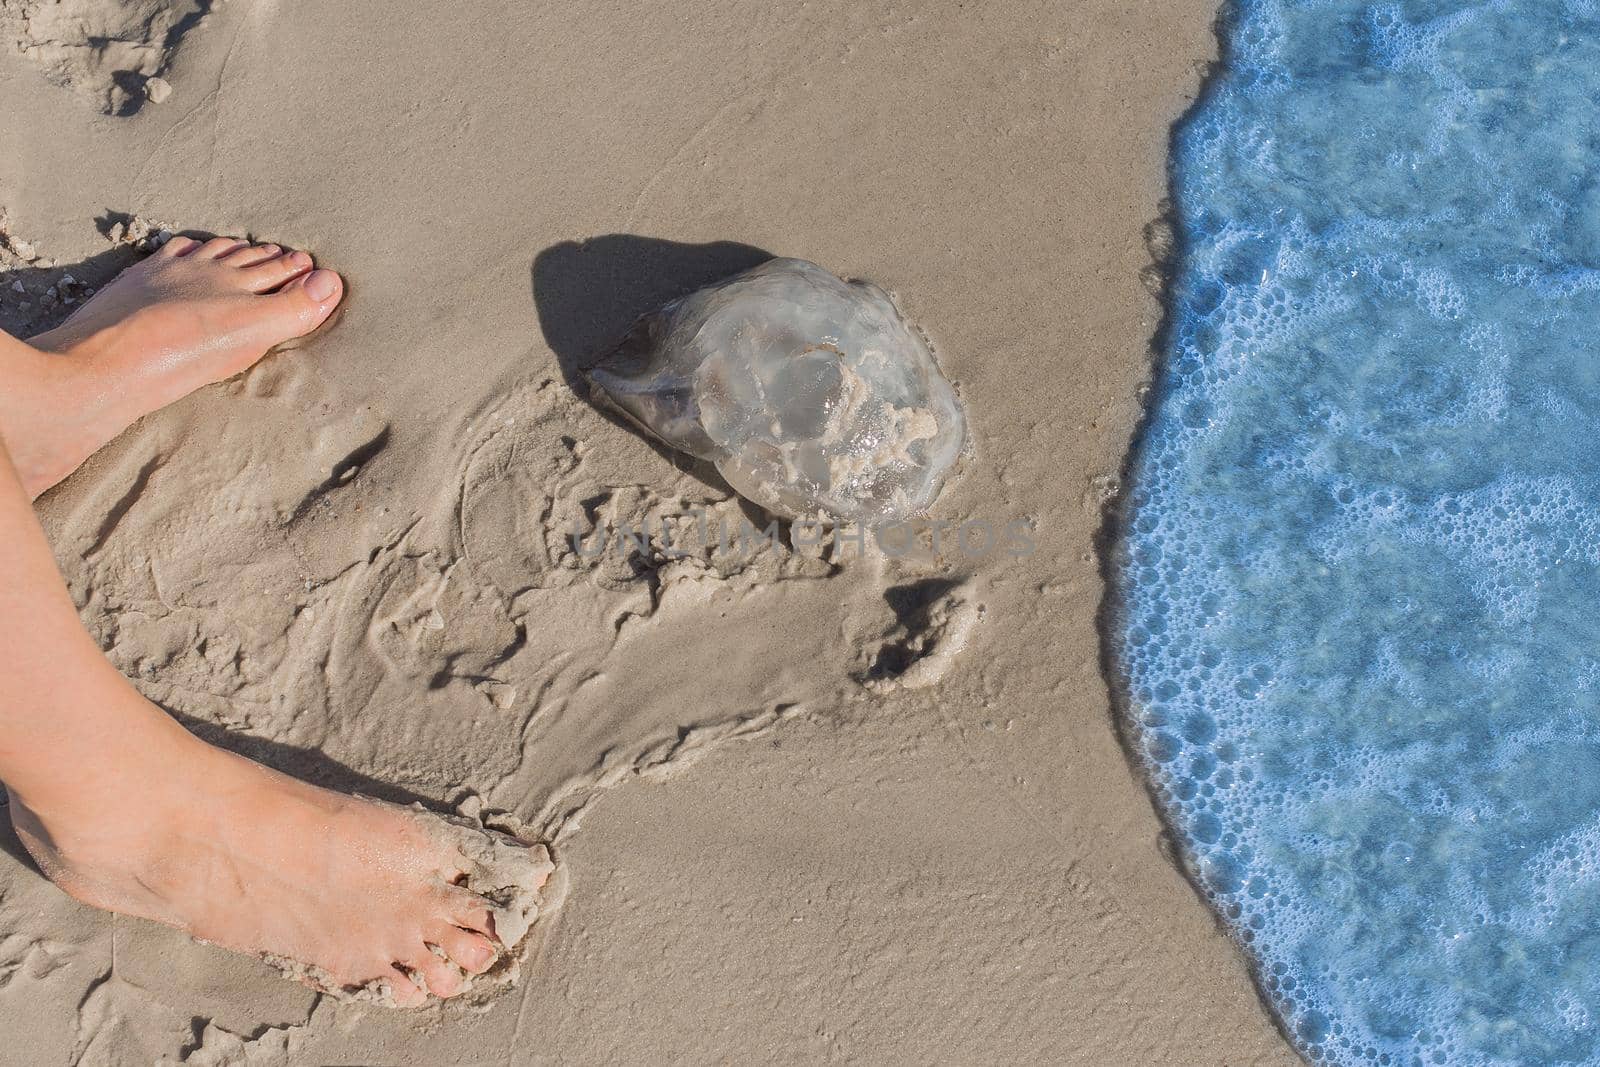 The girl's feet stand next to a jellyfish lying on the beach sea shore by the water by AYDO8